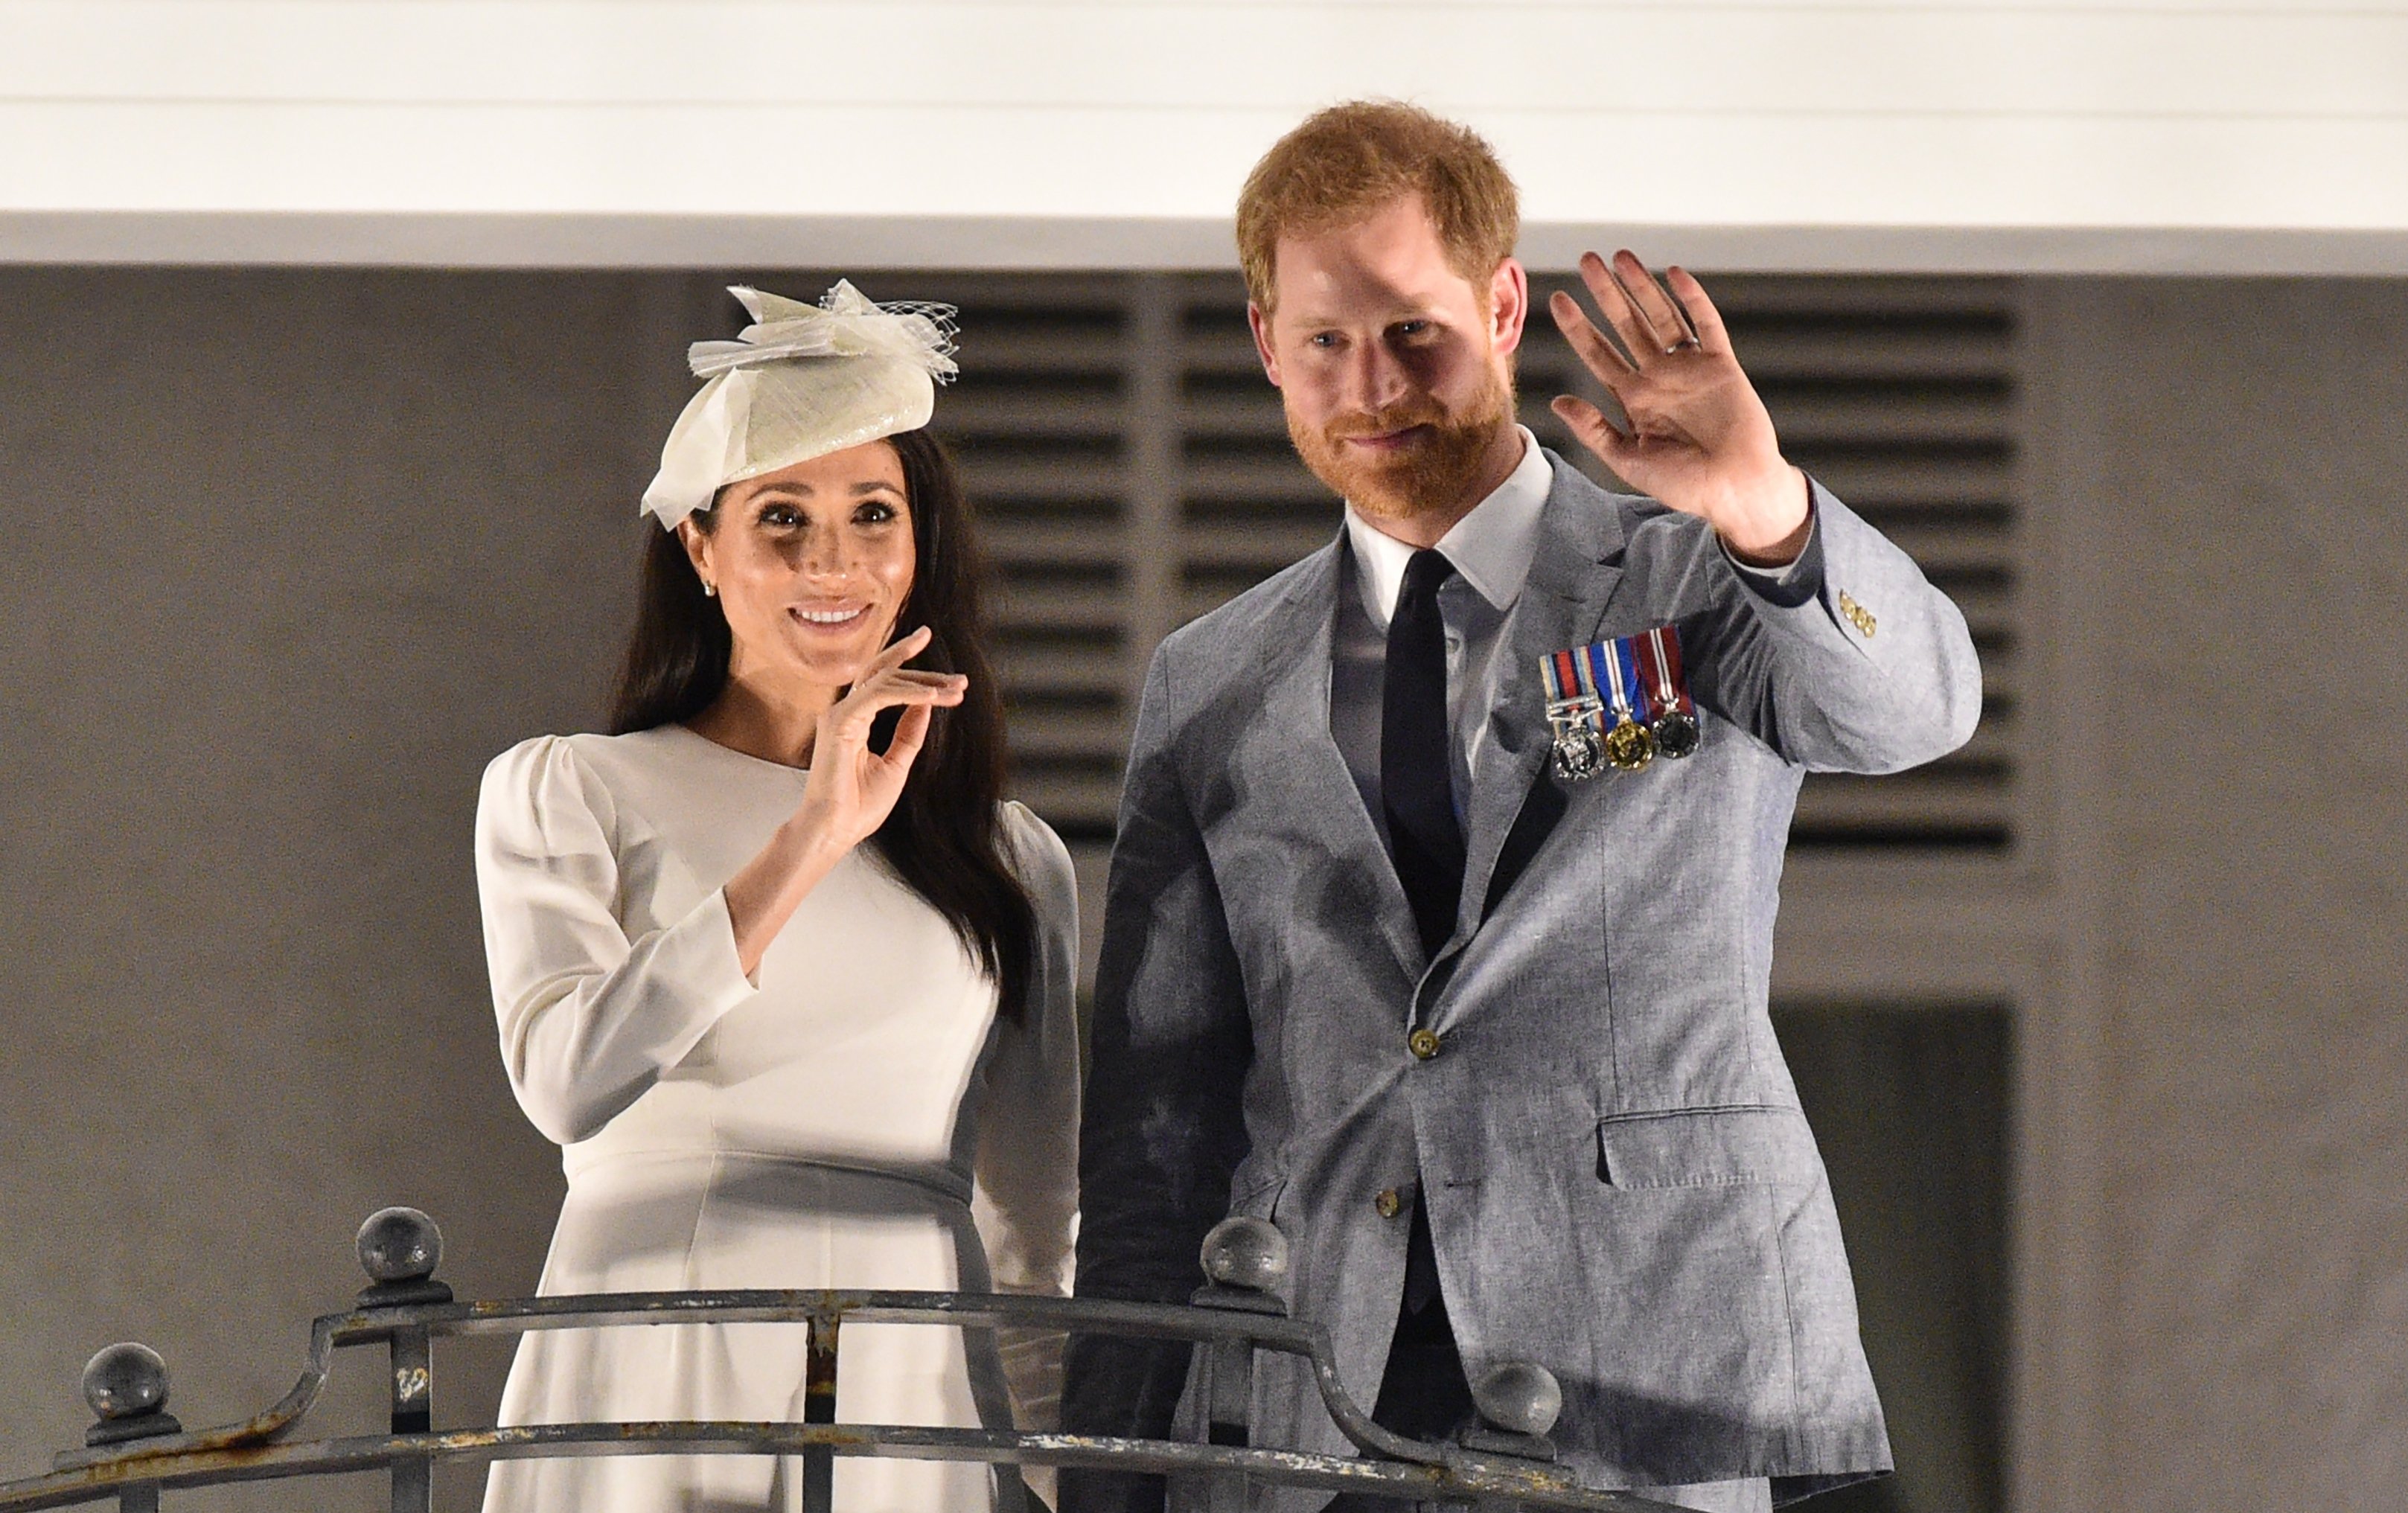 Prince Harry and his wife Meghan Markle pictured waving from the balcony of the Grand Pacific Hotel on October 23, 2018 in Suva, Fiji. | Source: Getty Images